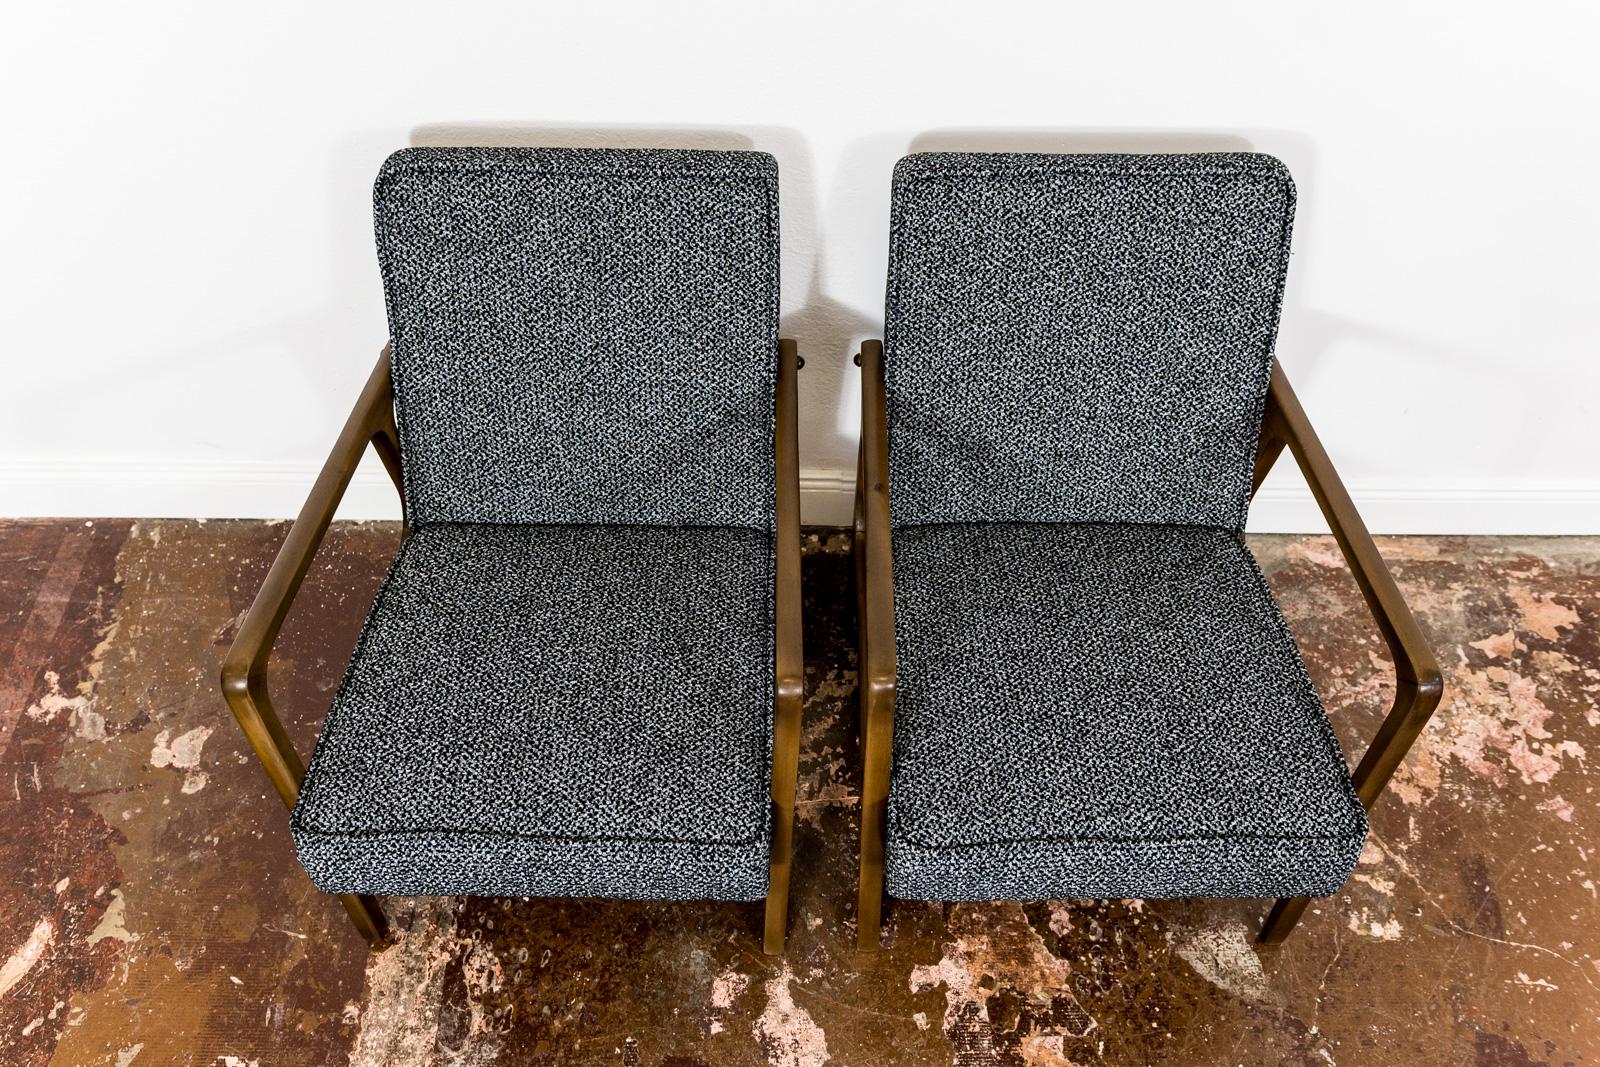 Pair Of Mid Century Armchairs Type 04-B From Bydgoskie Fabryki Mebli, 1960's For Sale 7